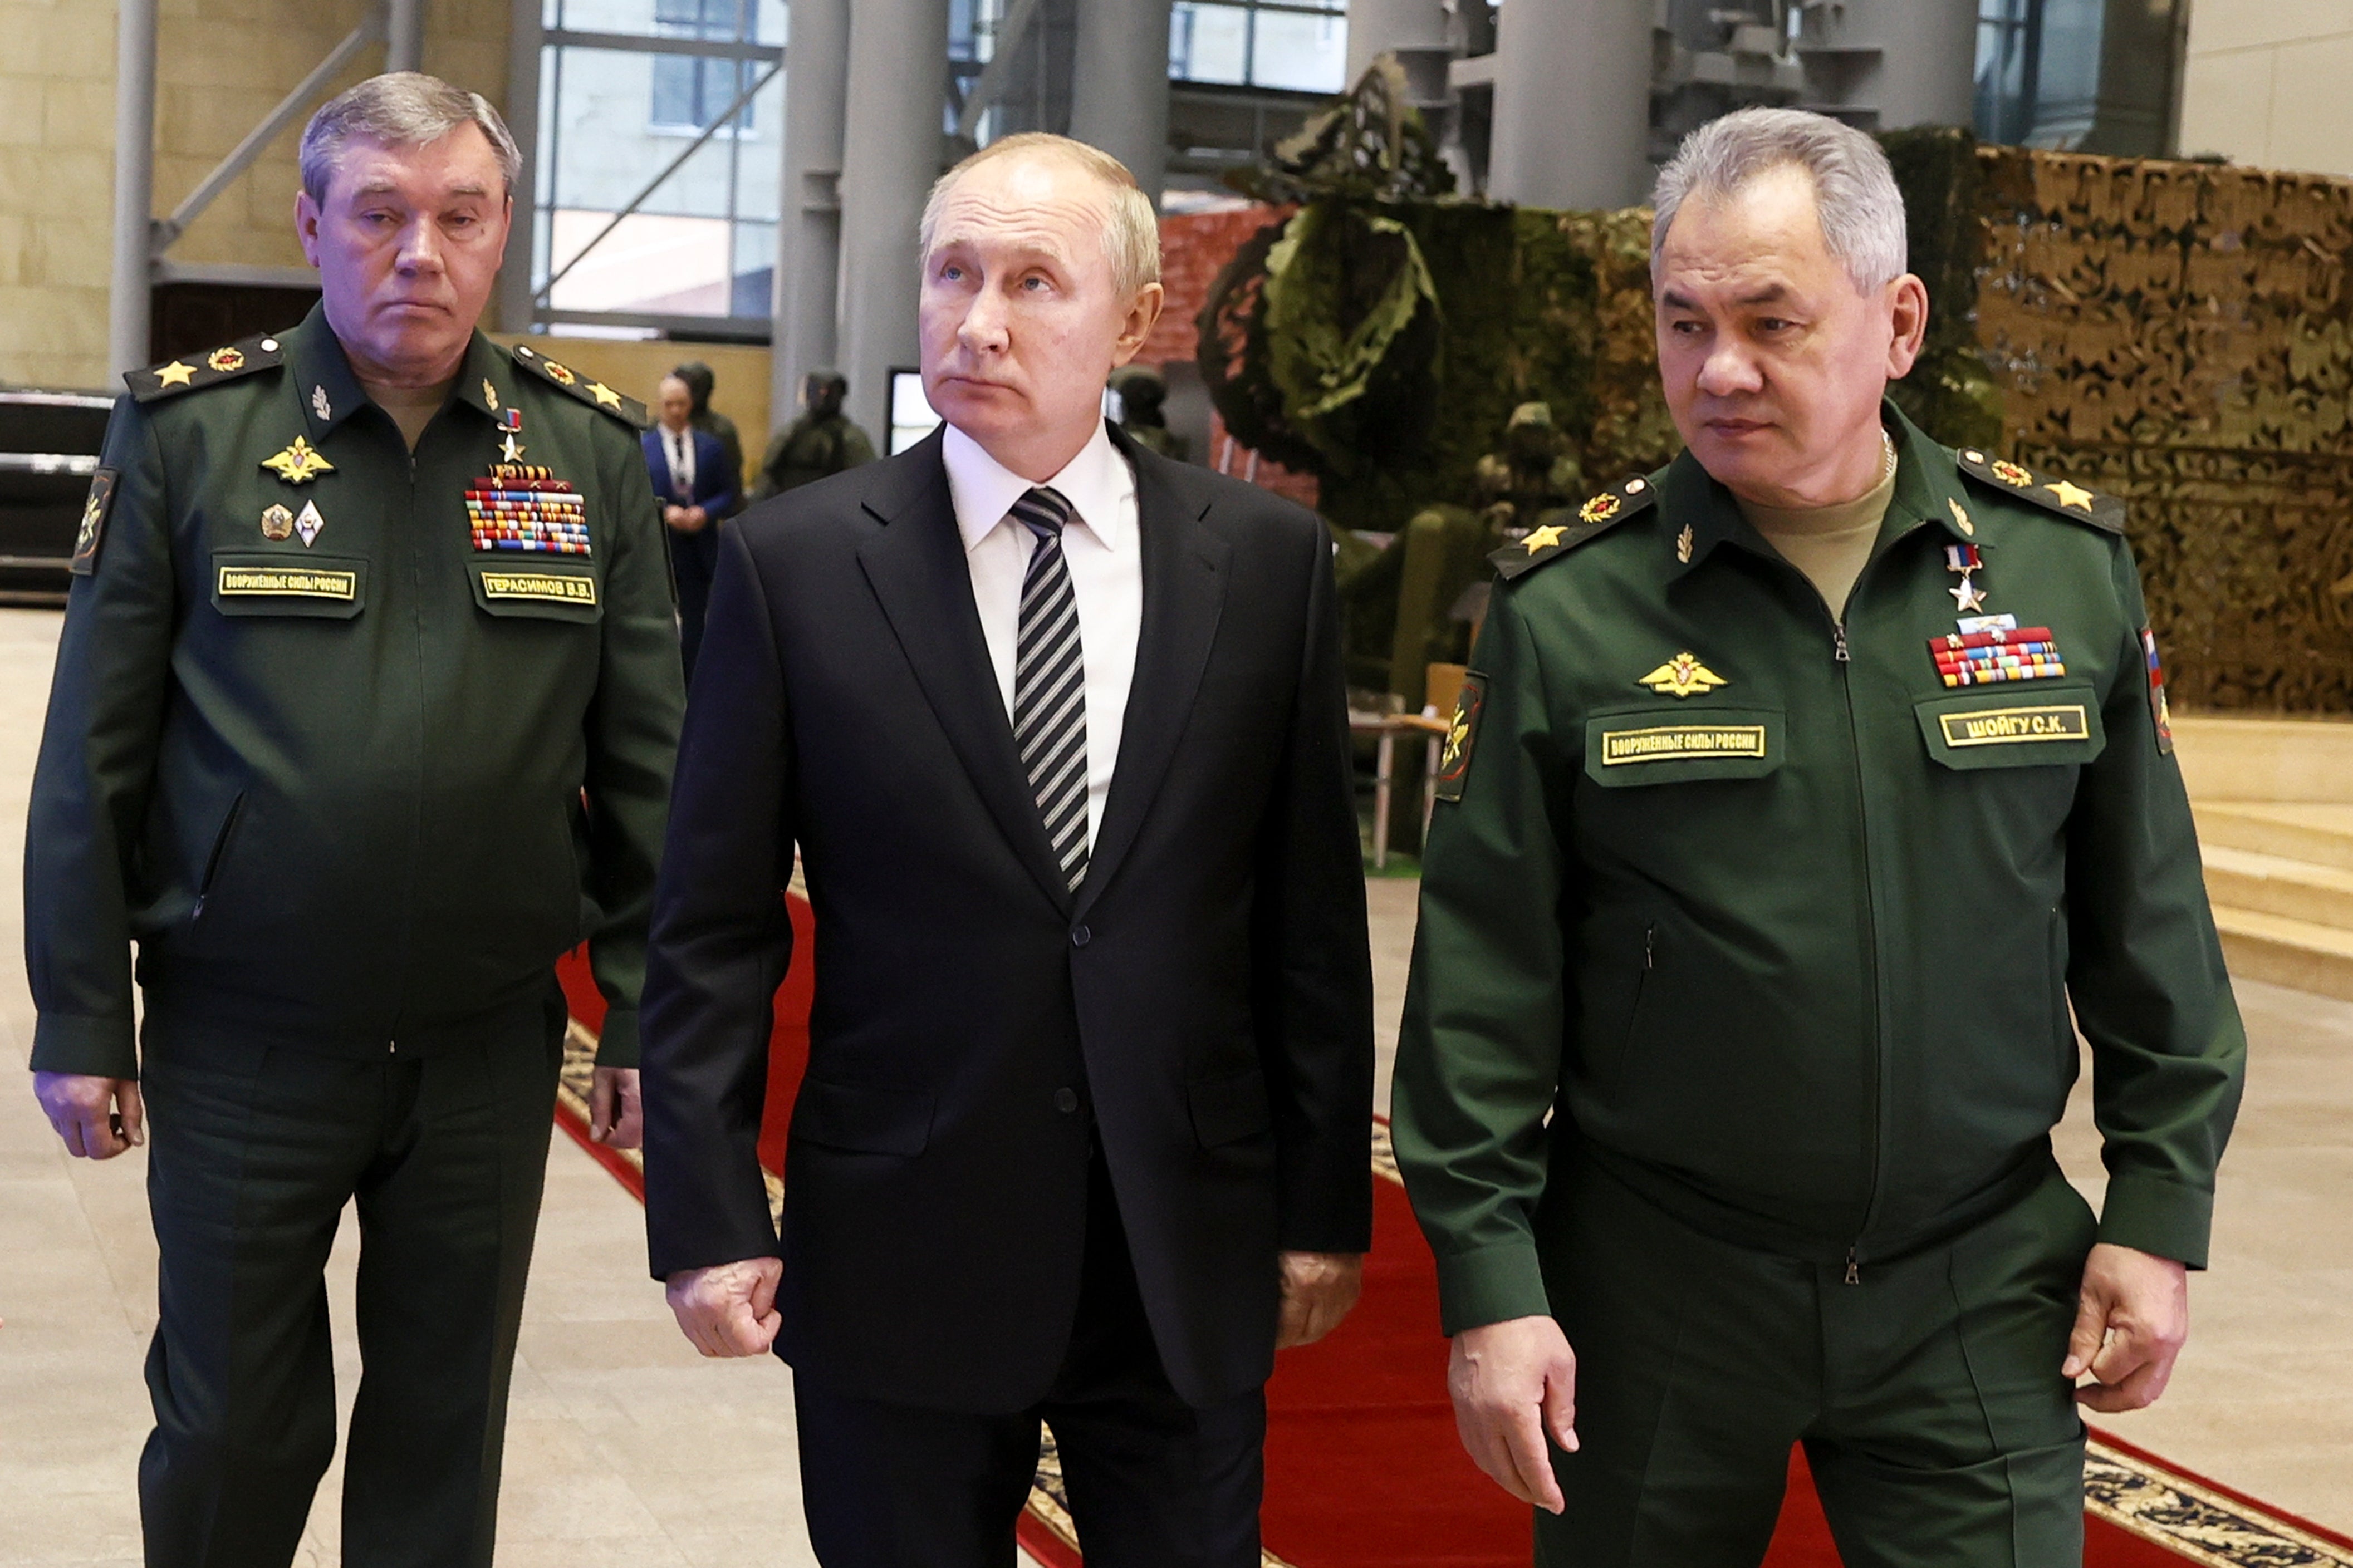 The recent reshuffle of generals demonstrates that the war is not proceeding as President Putin wishes